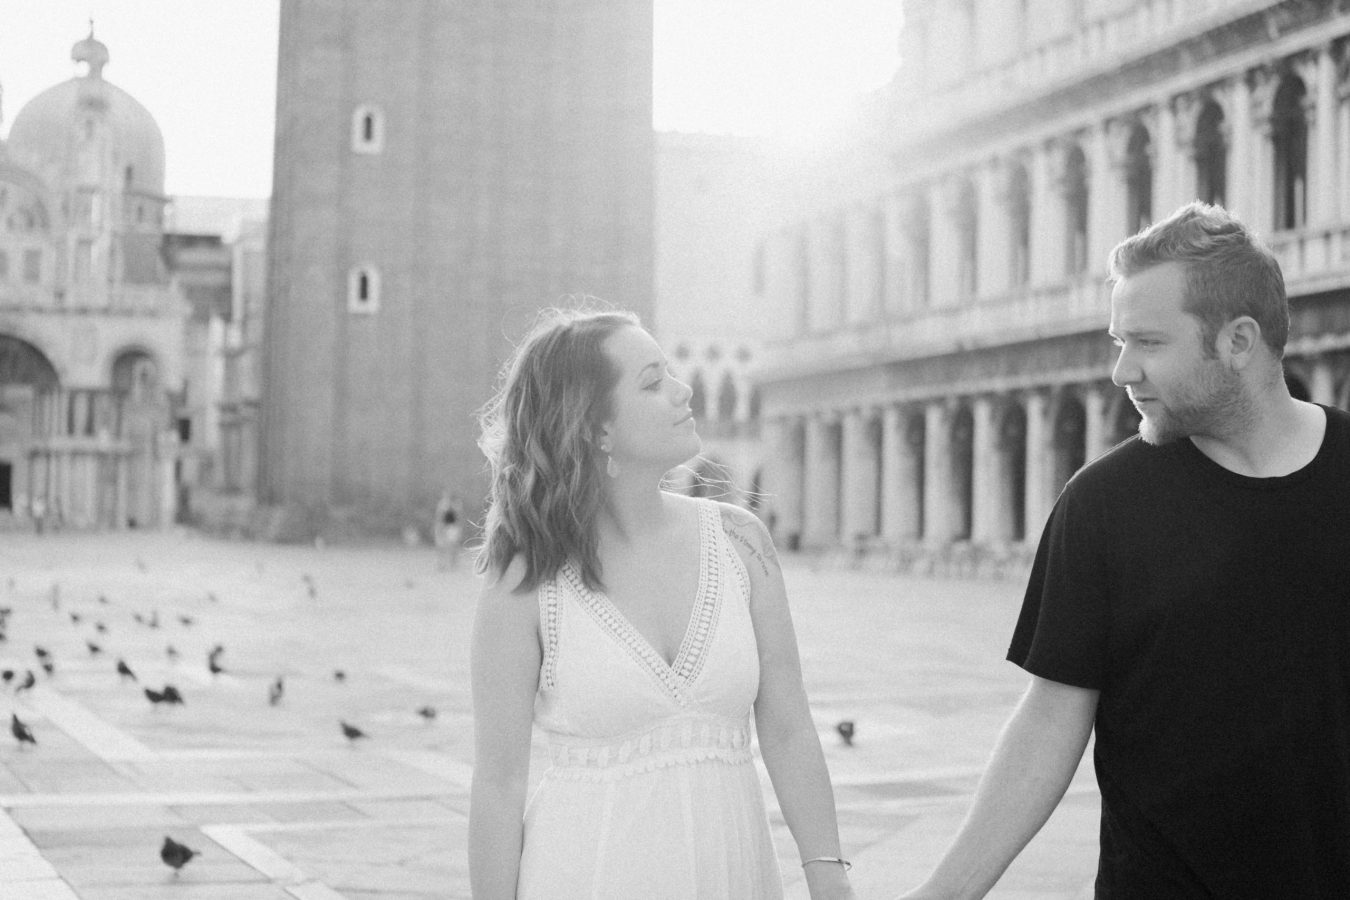 Just engaged, traveling through Europe. Couple photoshoot in Venice